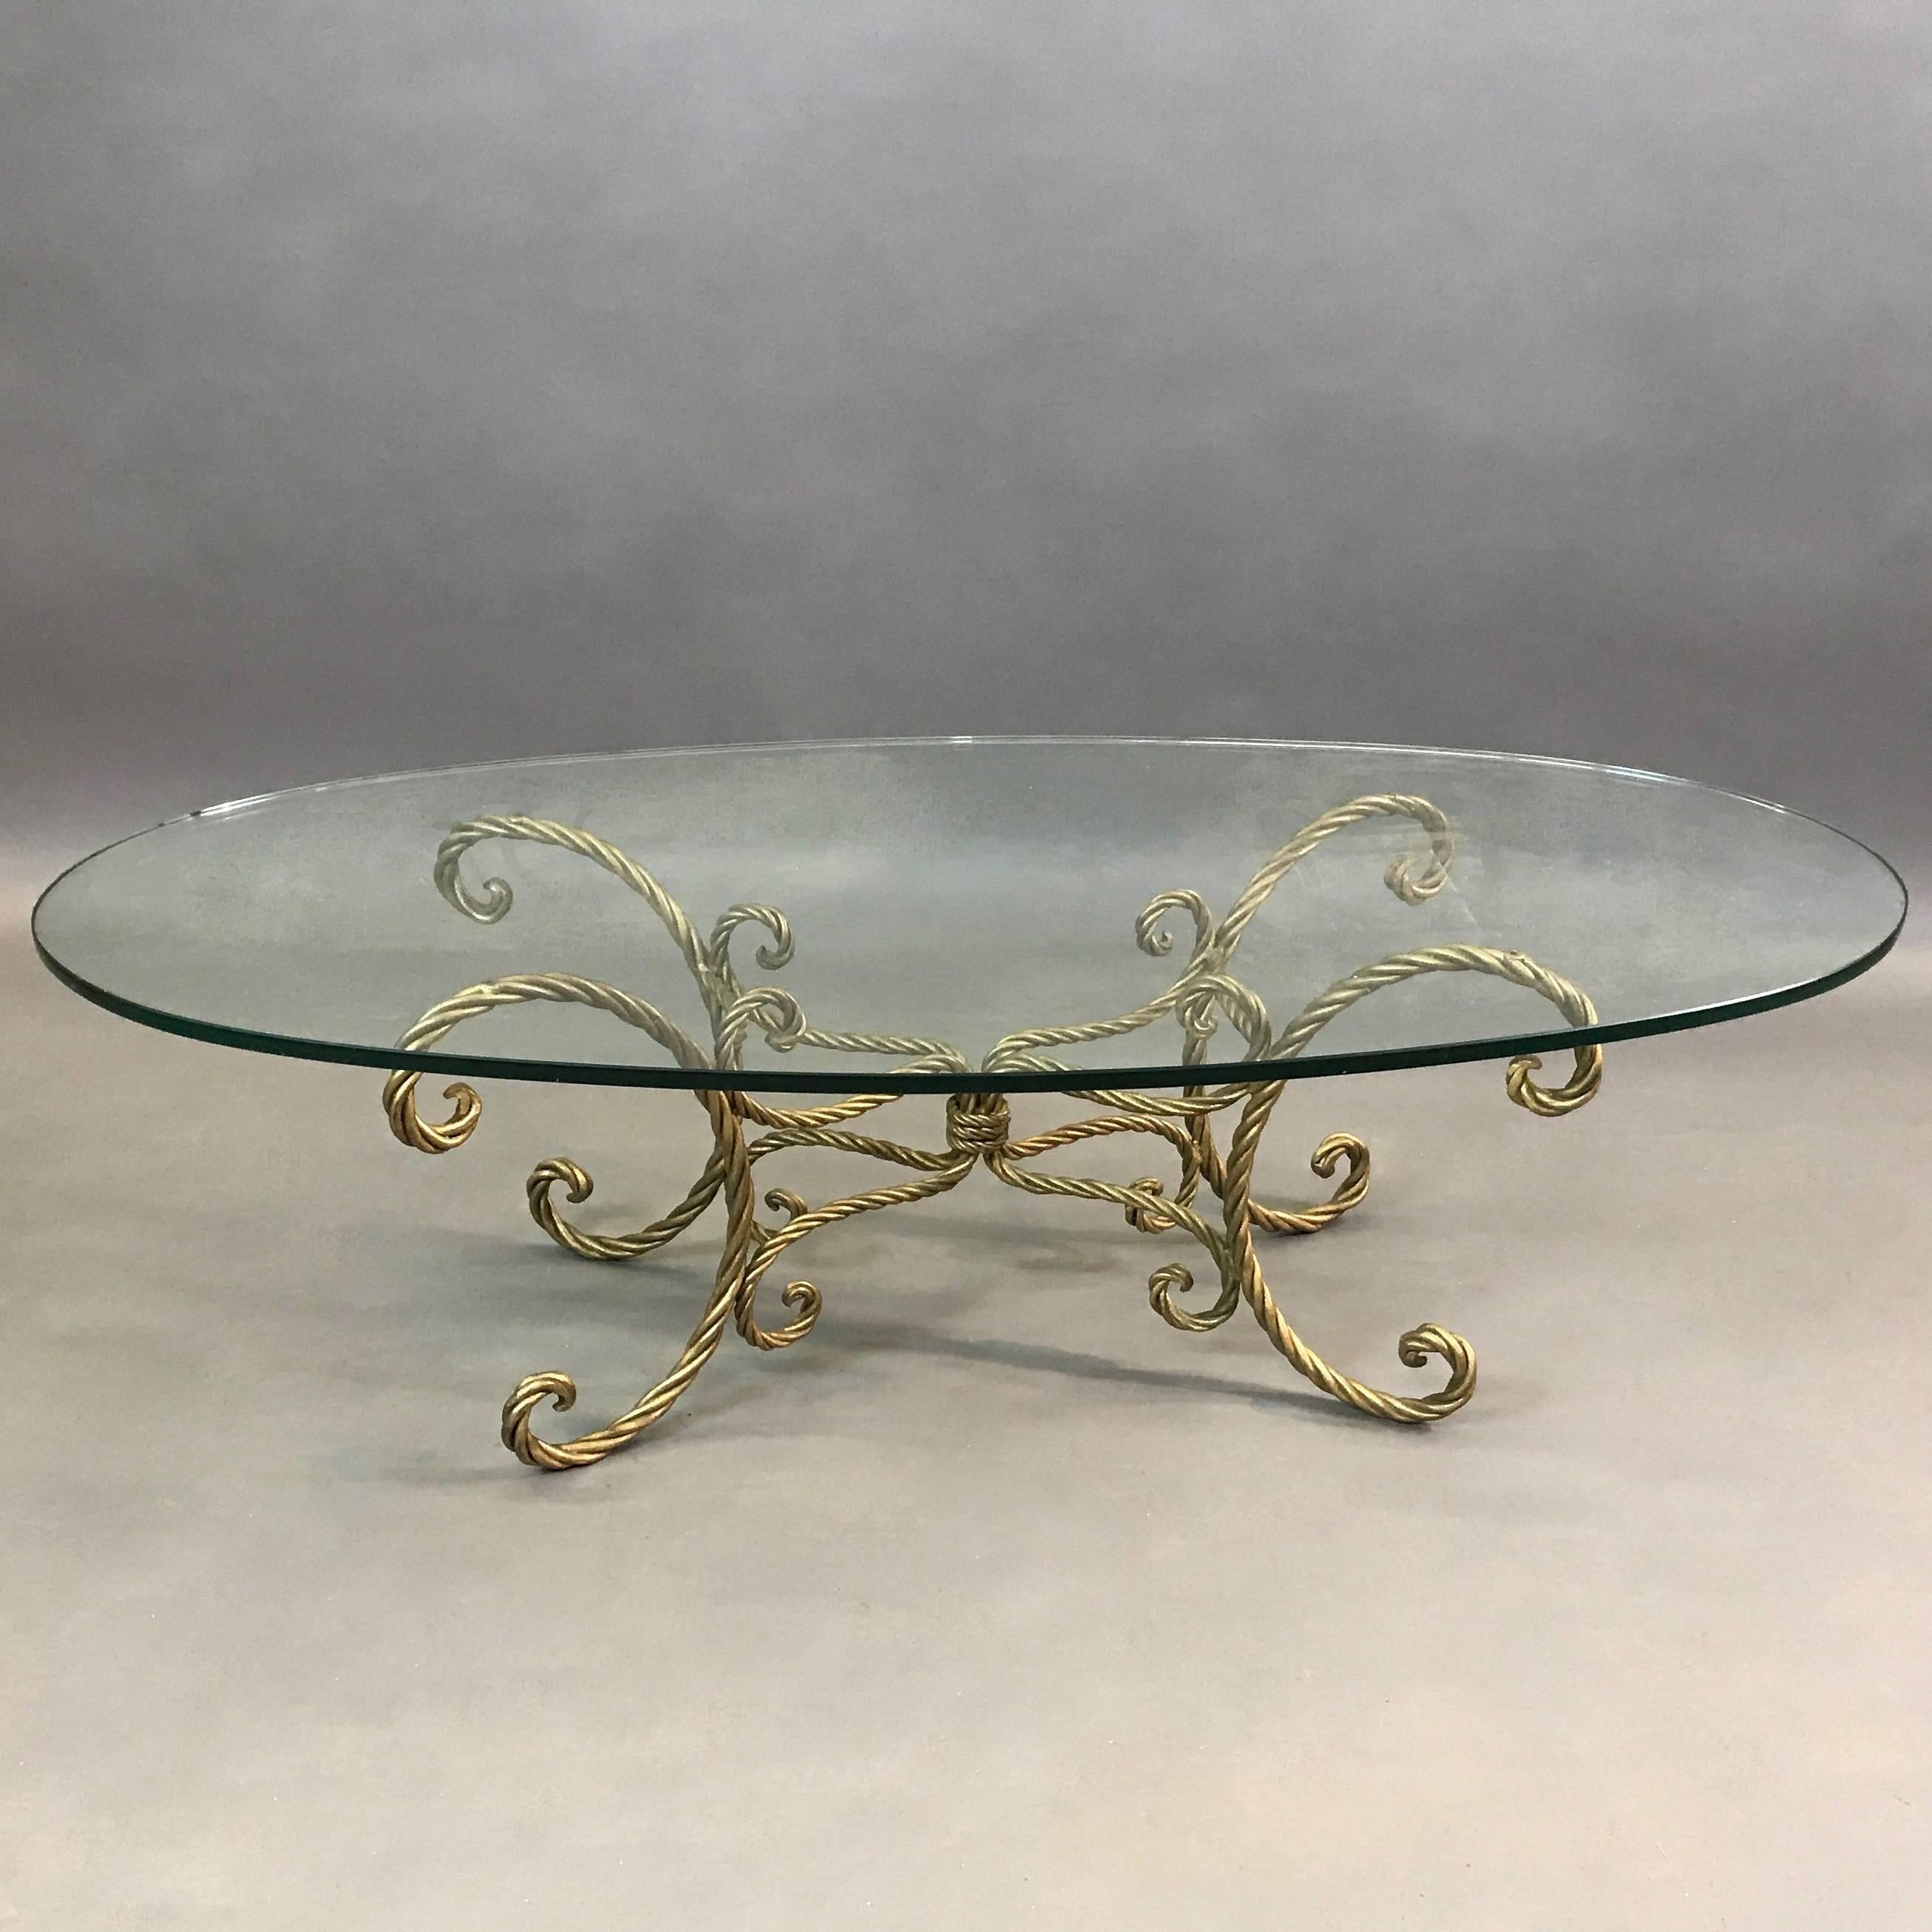 Italian, midcentury, Hollywood Regency, coffee or cocktail table features a gilt iron, braided, rope motif base with a thick oval glass top.